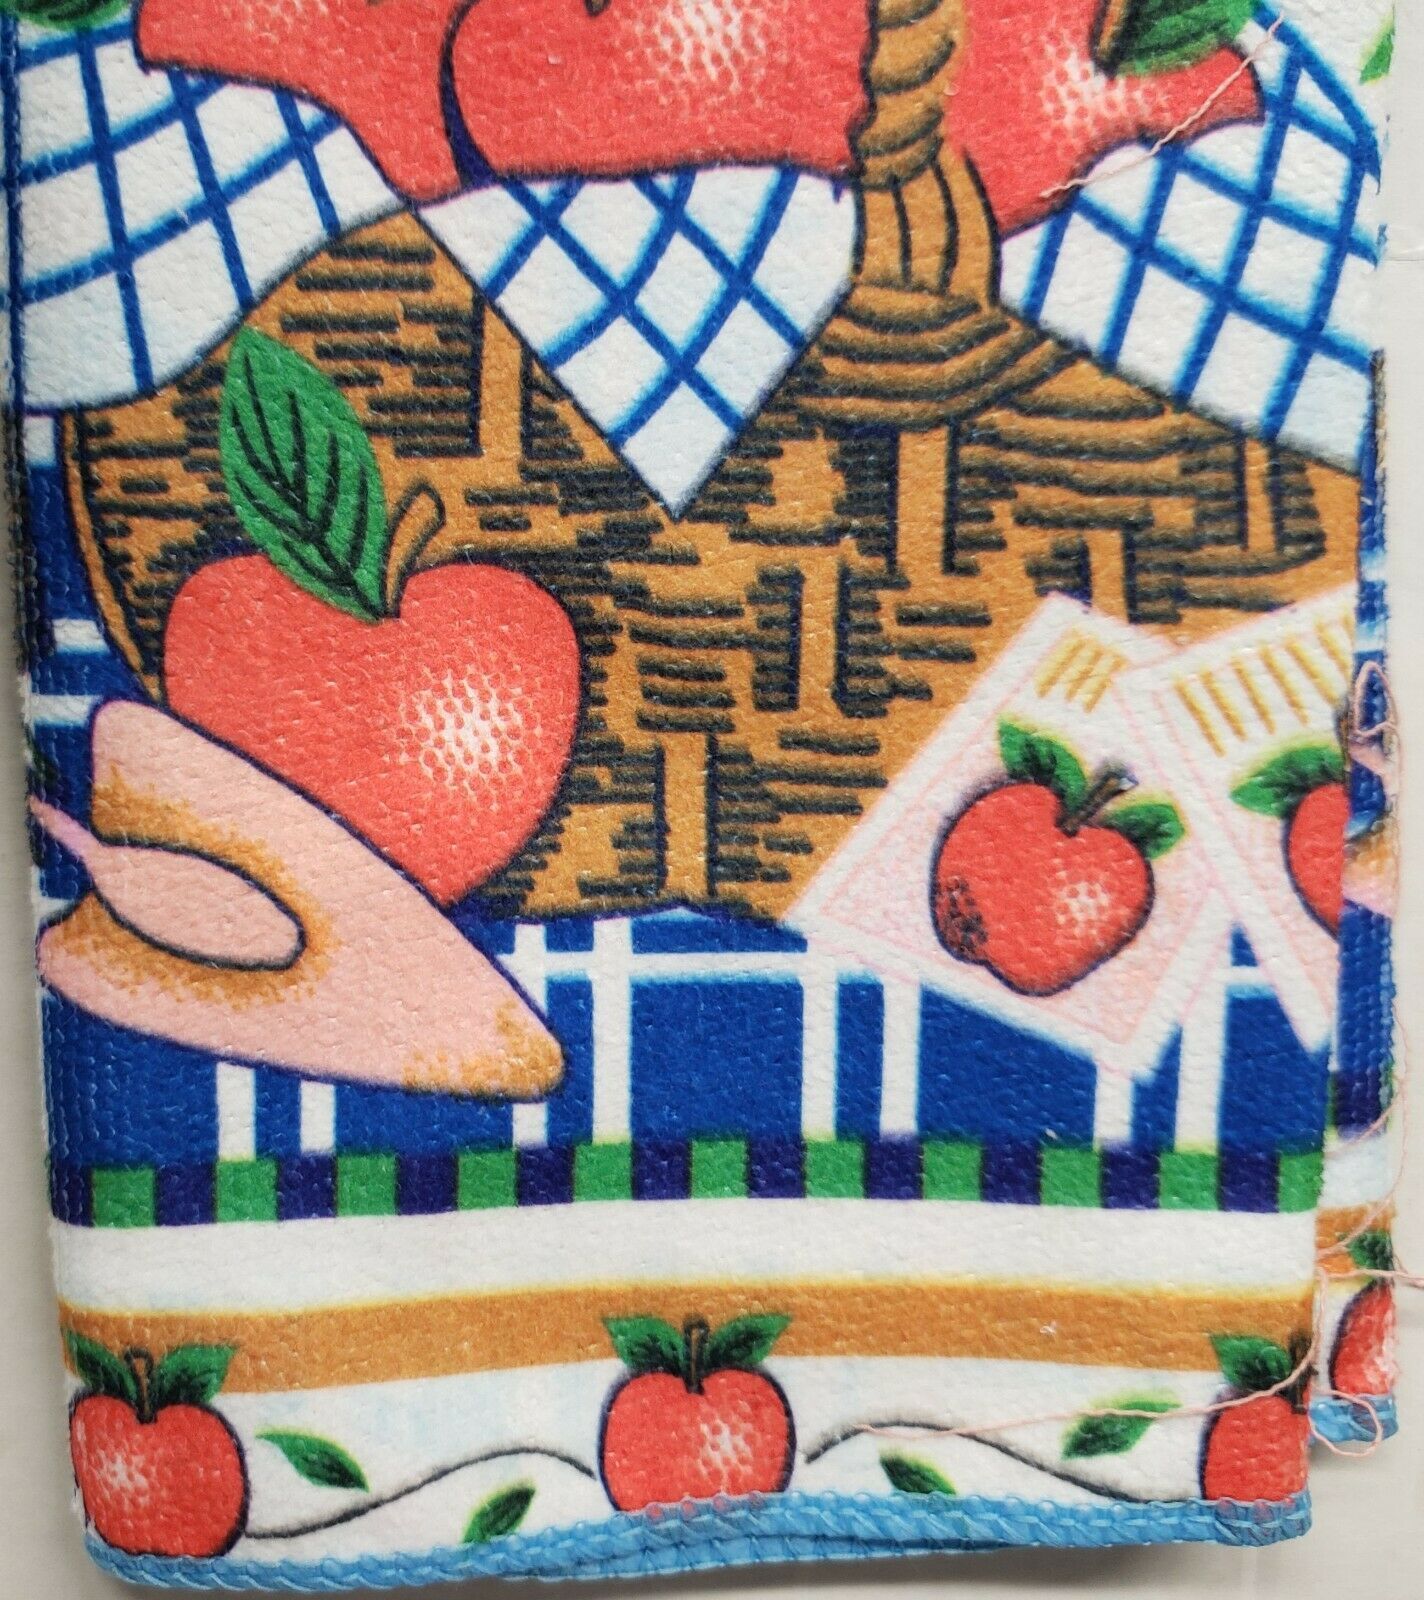 WATERMELONS & CITRUS FRUITS,GR Details about   SET OF 2 SAME PRINTED MICROFIBER TOWELS 15"x25" 